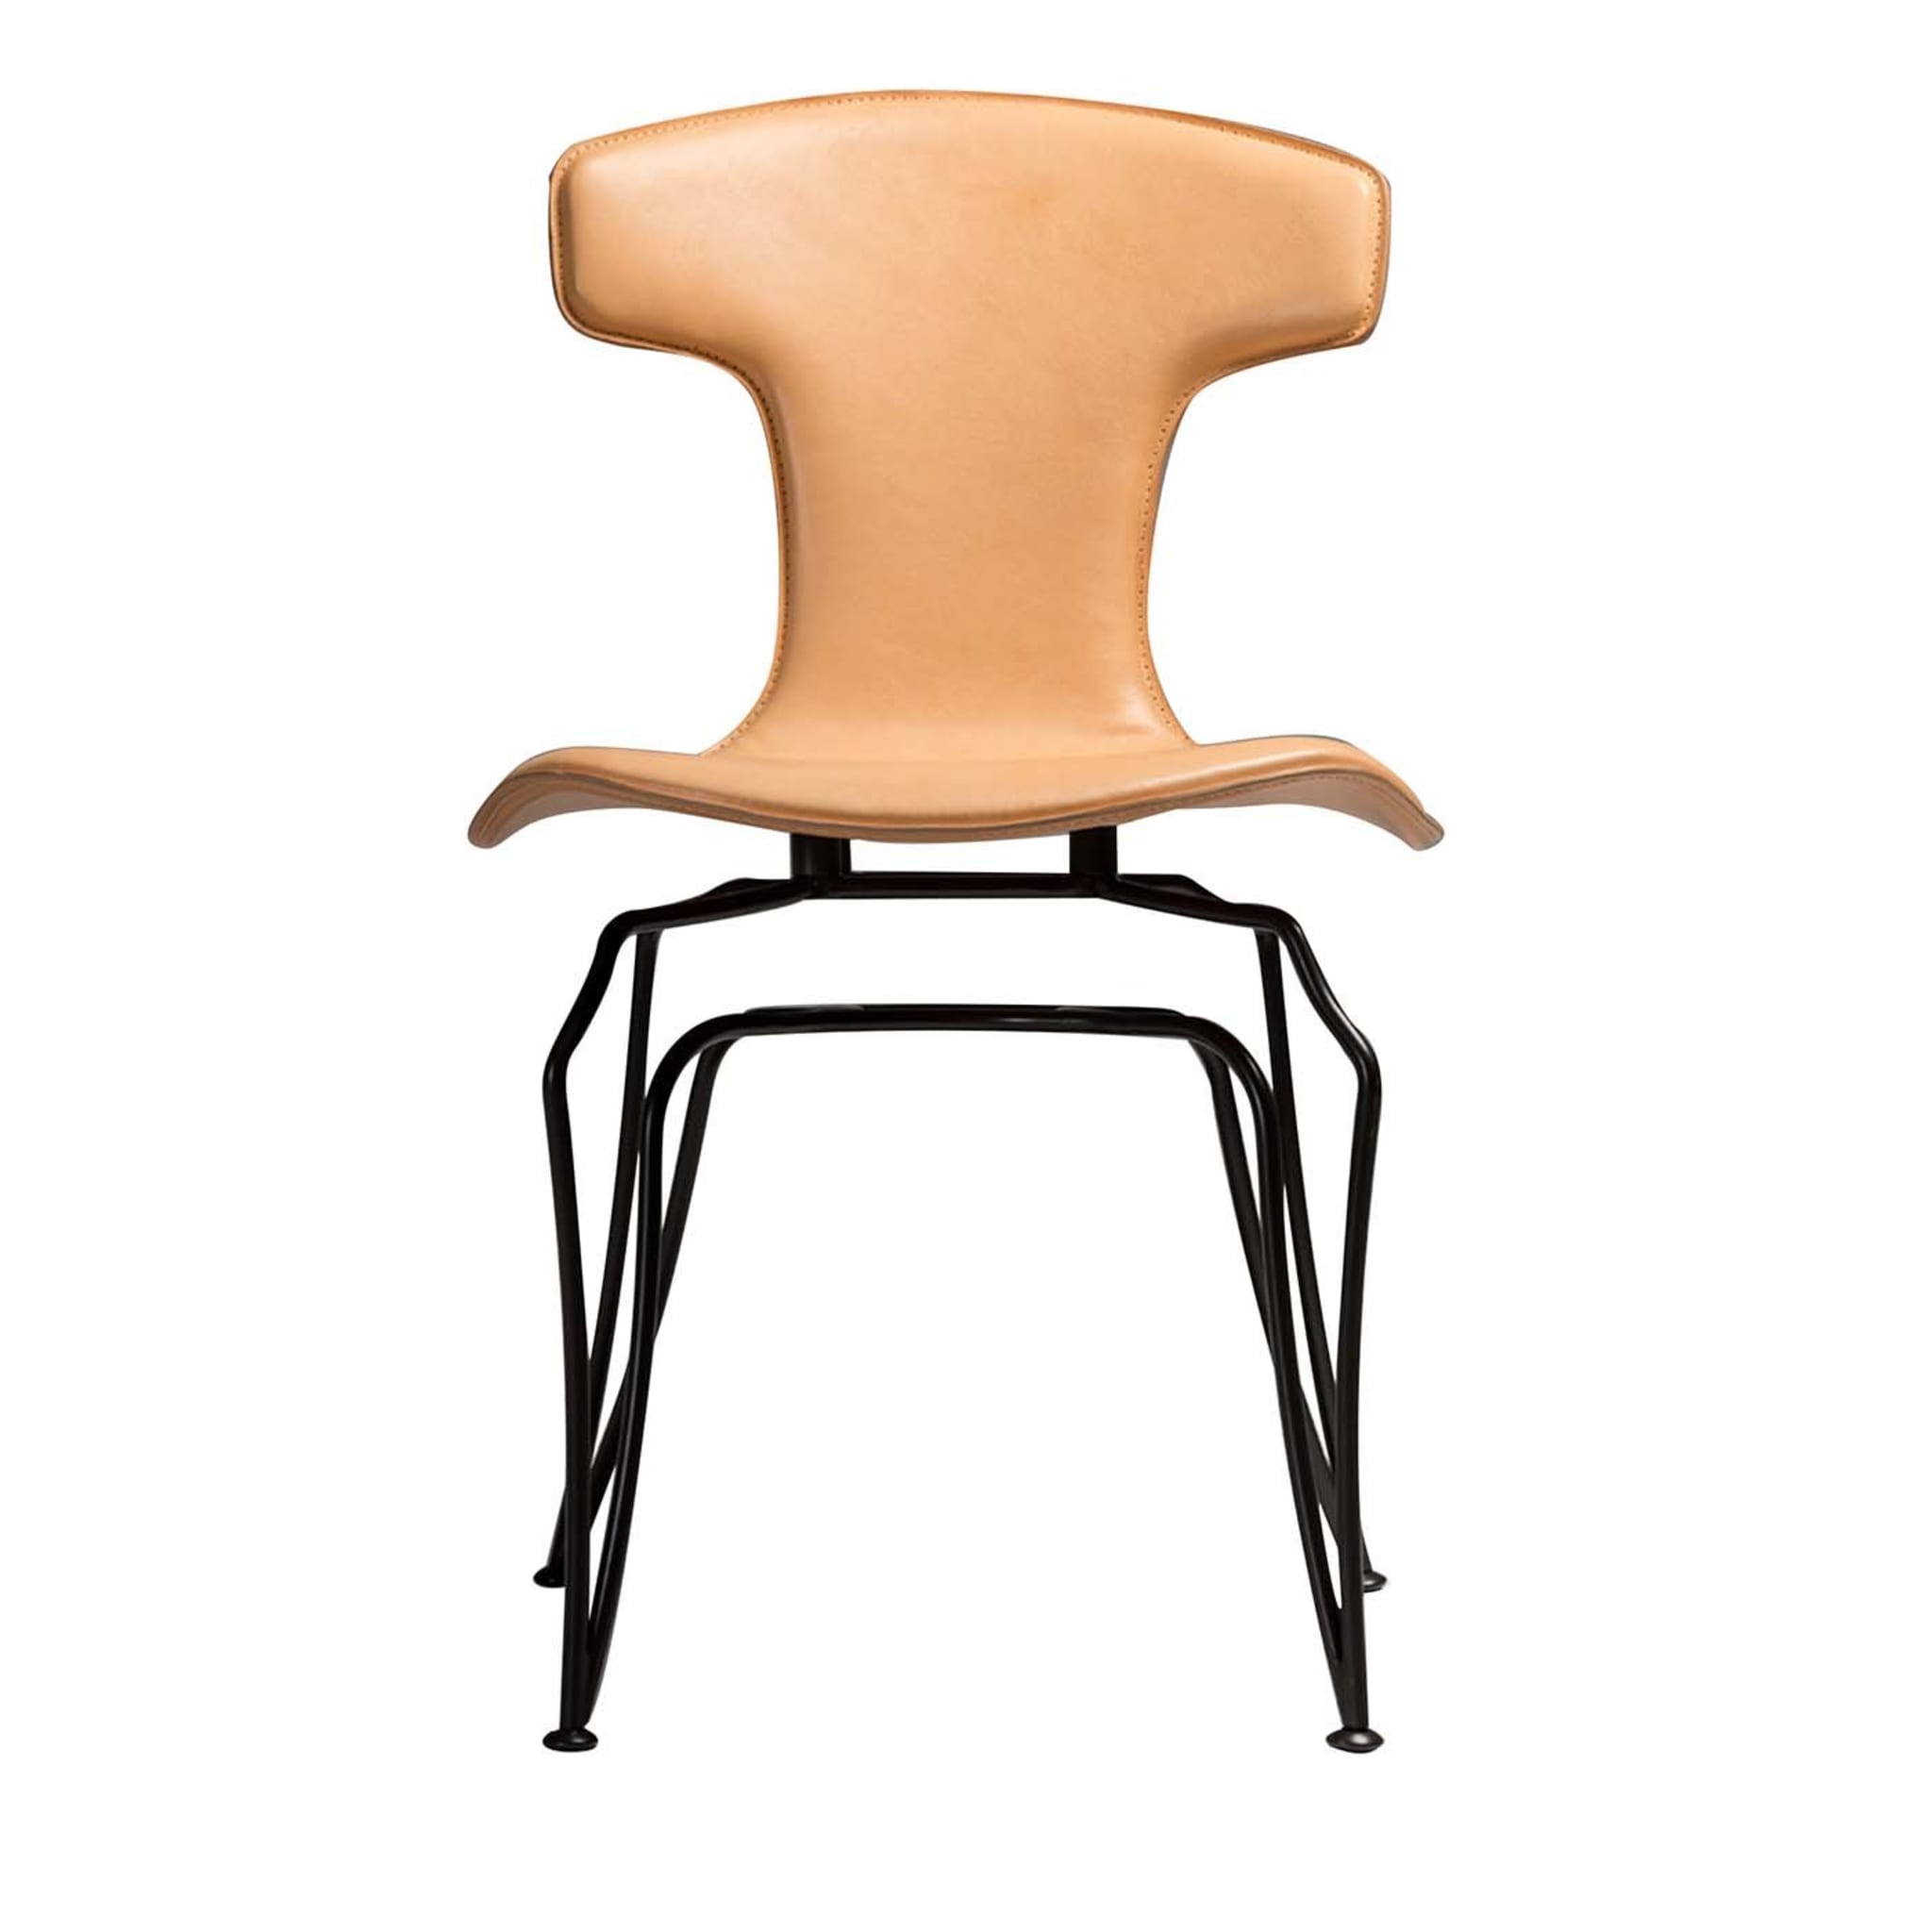 Jole Chair Tribeca Collection by Marco and Giulio Mantellassi - Main view